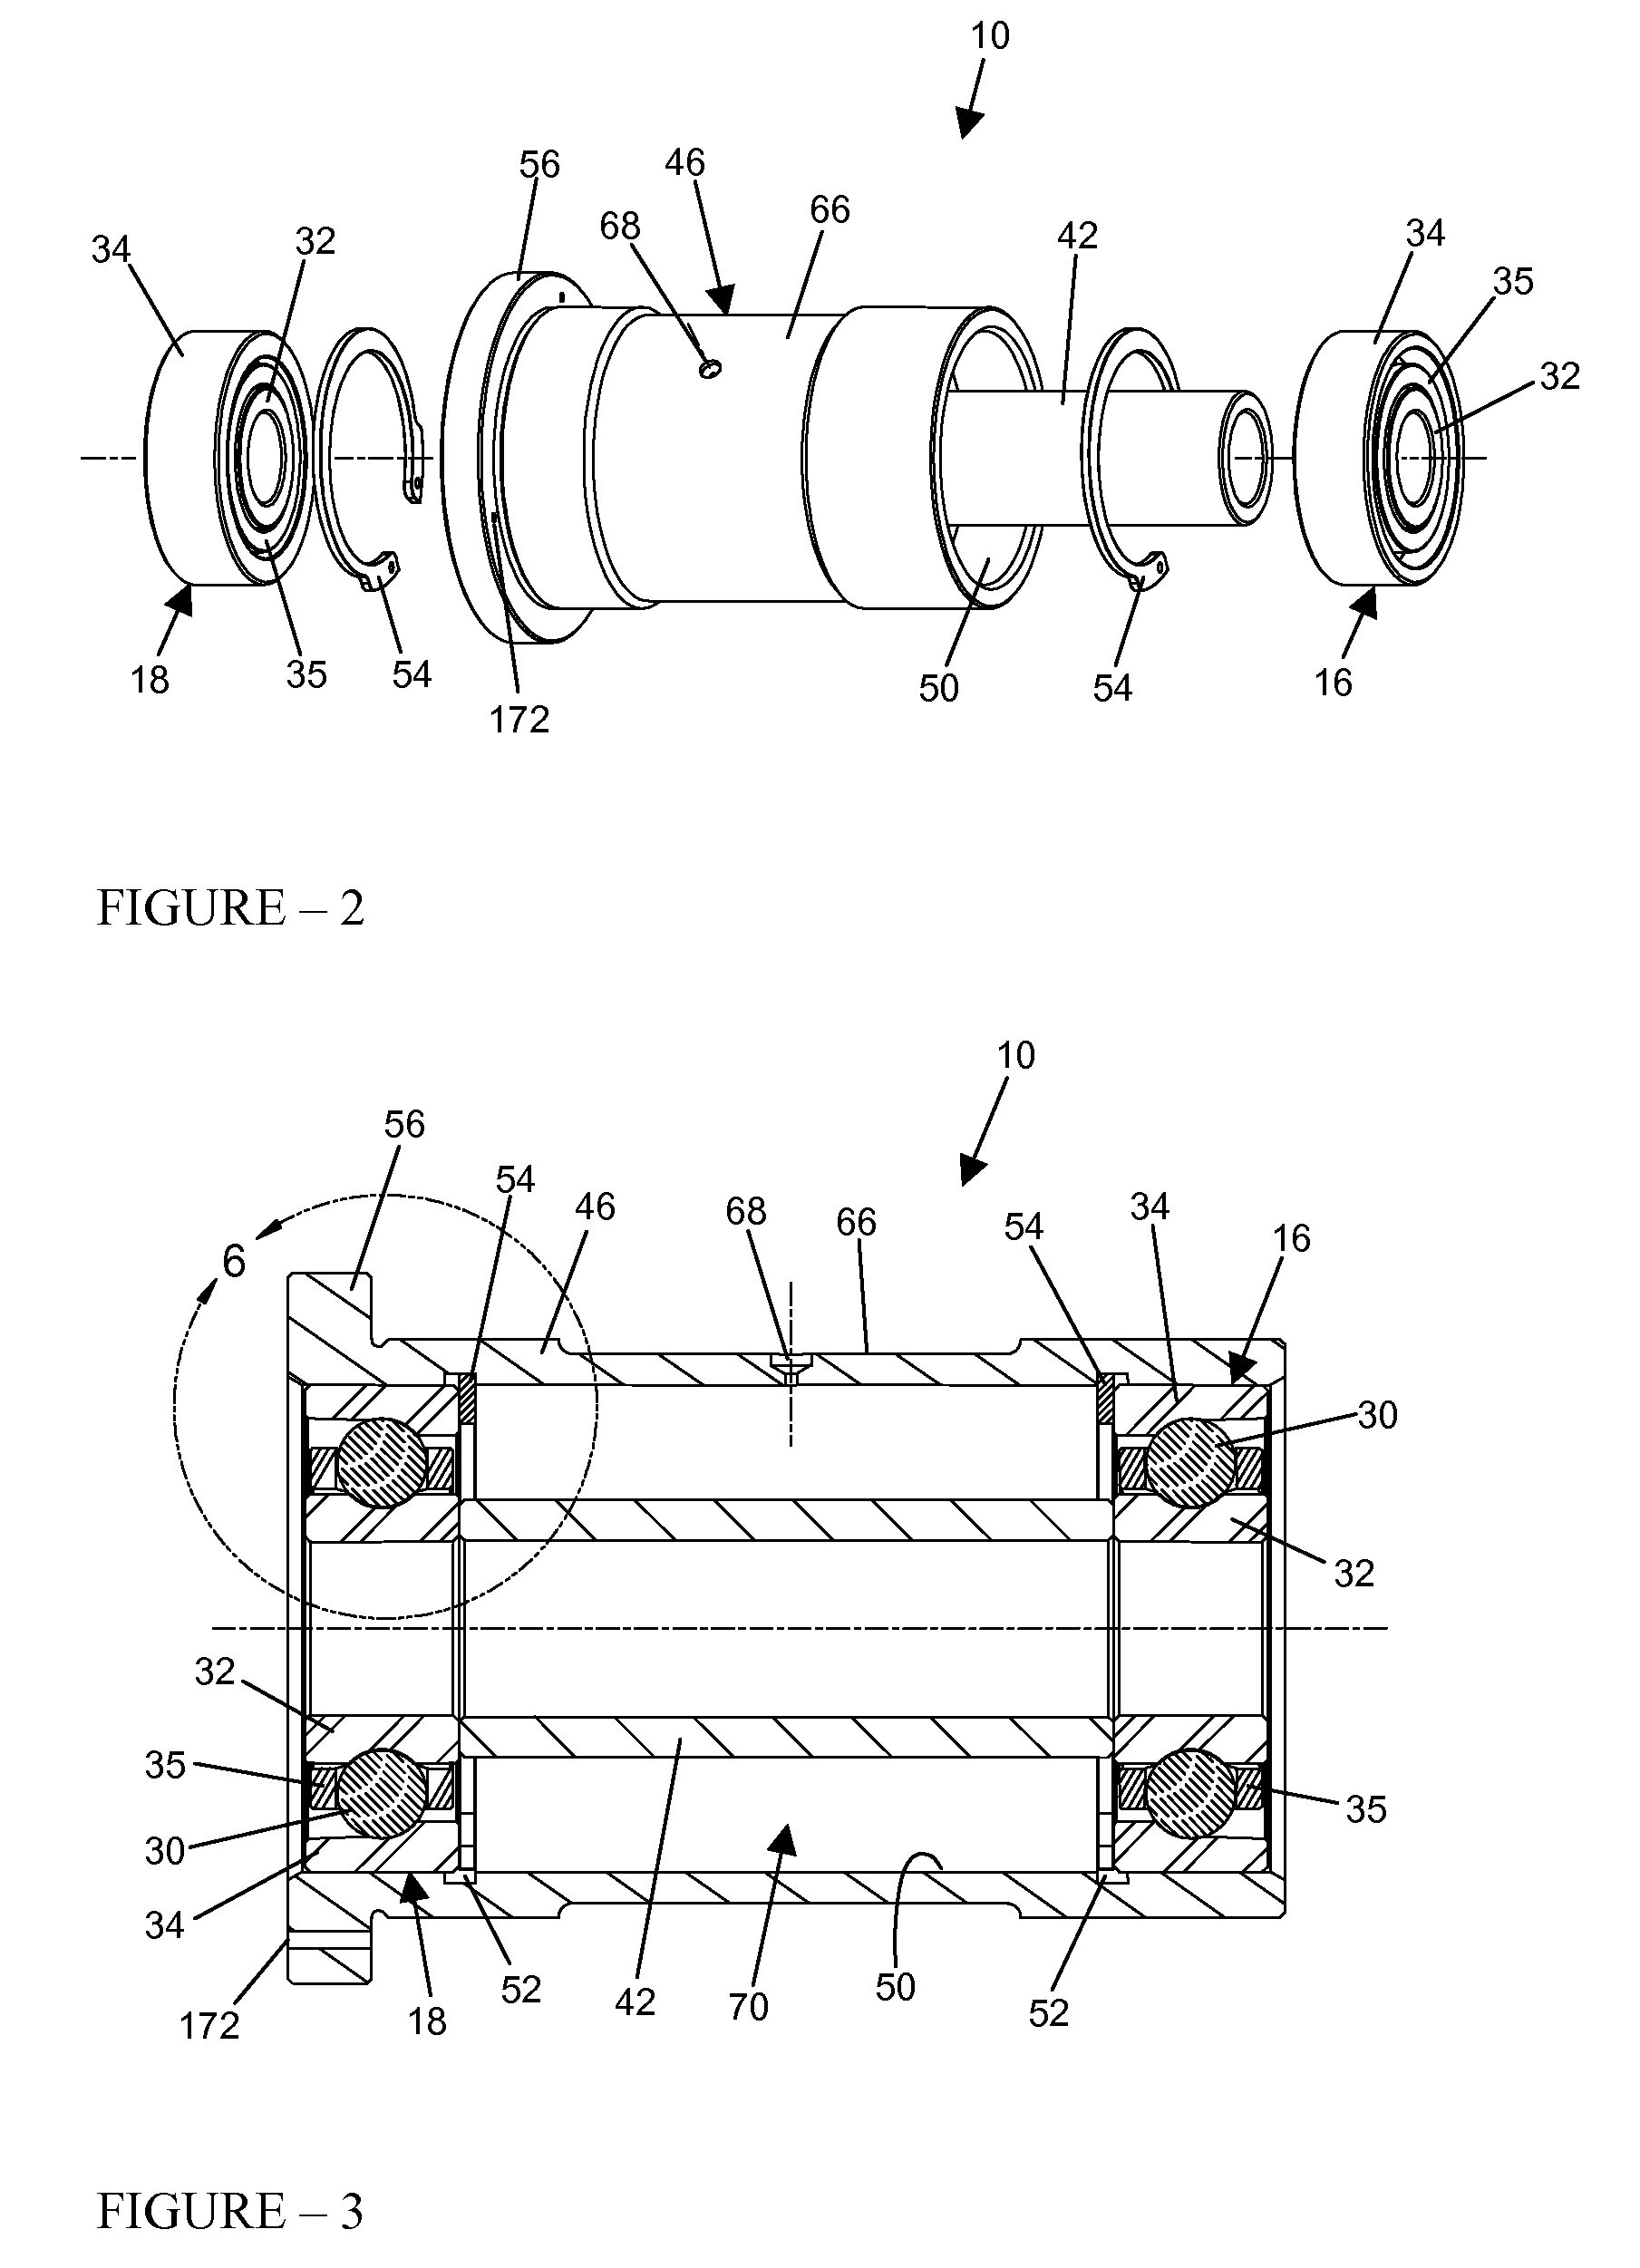 Floating bearing cartridge for a turbocharger shaft